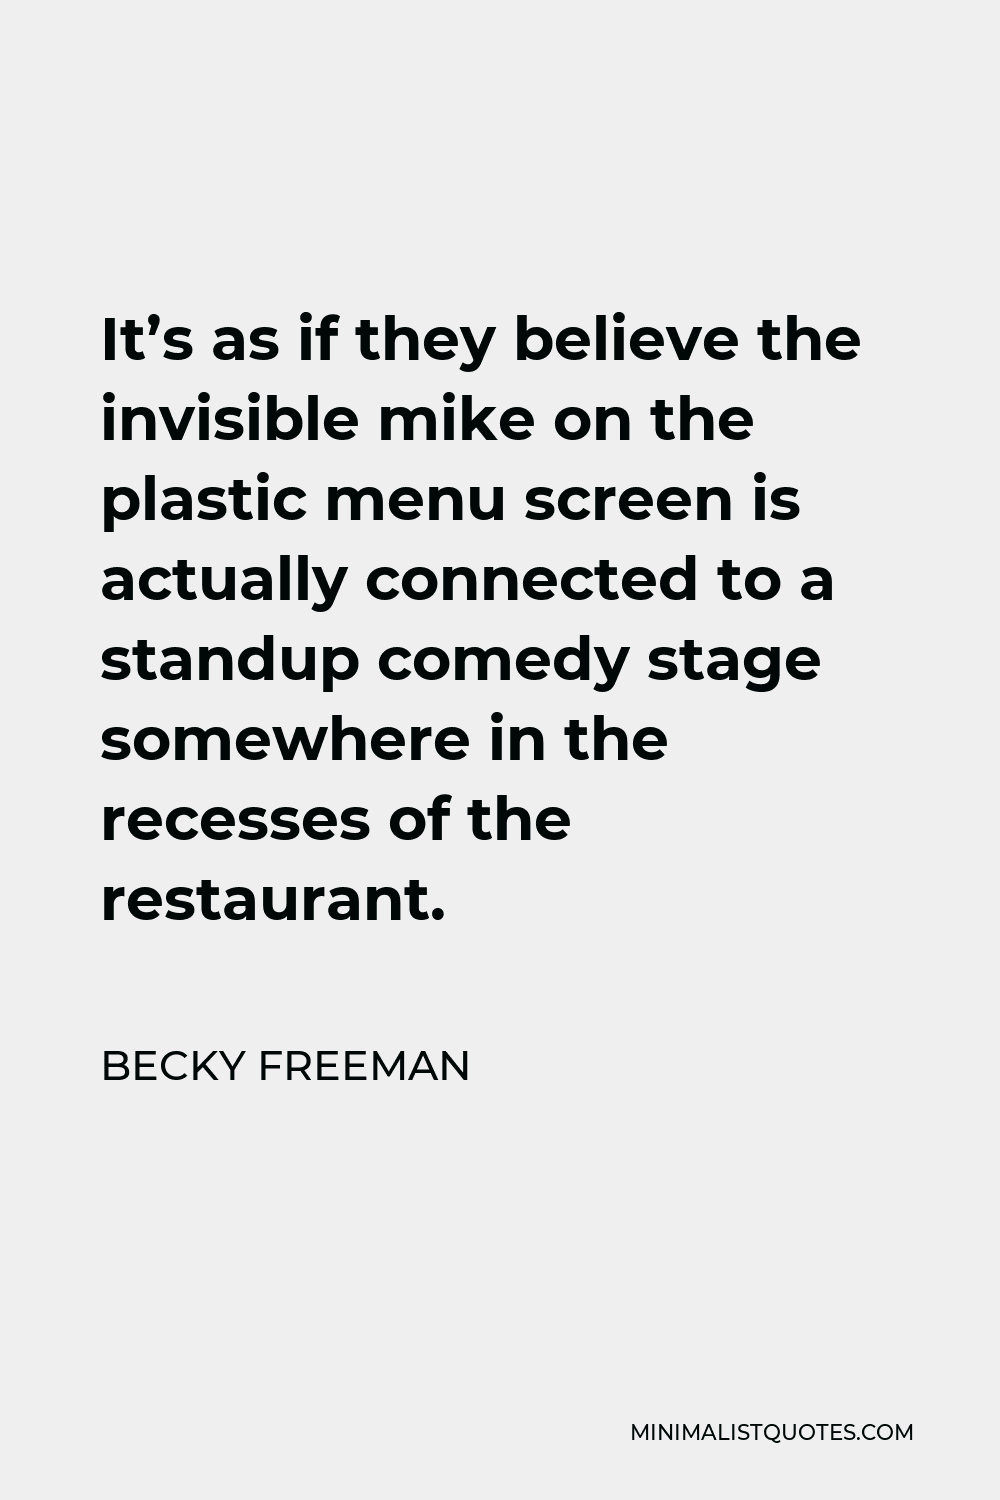 Becky Freeman Quote - It’s as if they believe the invisible mike on the plastic menu screen is actually connected to a standup comedy stage somewhere in the recesses of the restaurant.